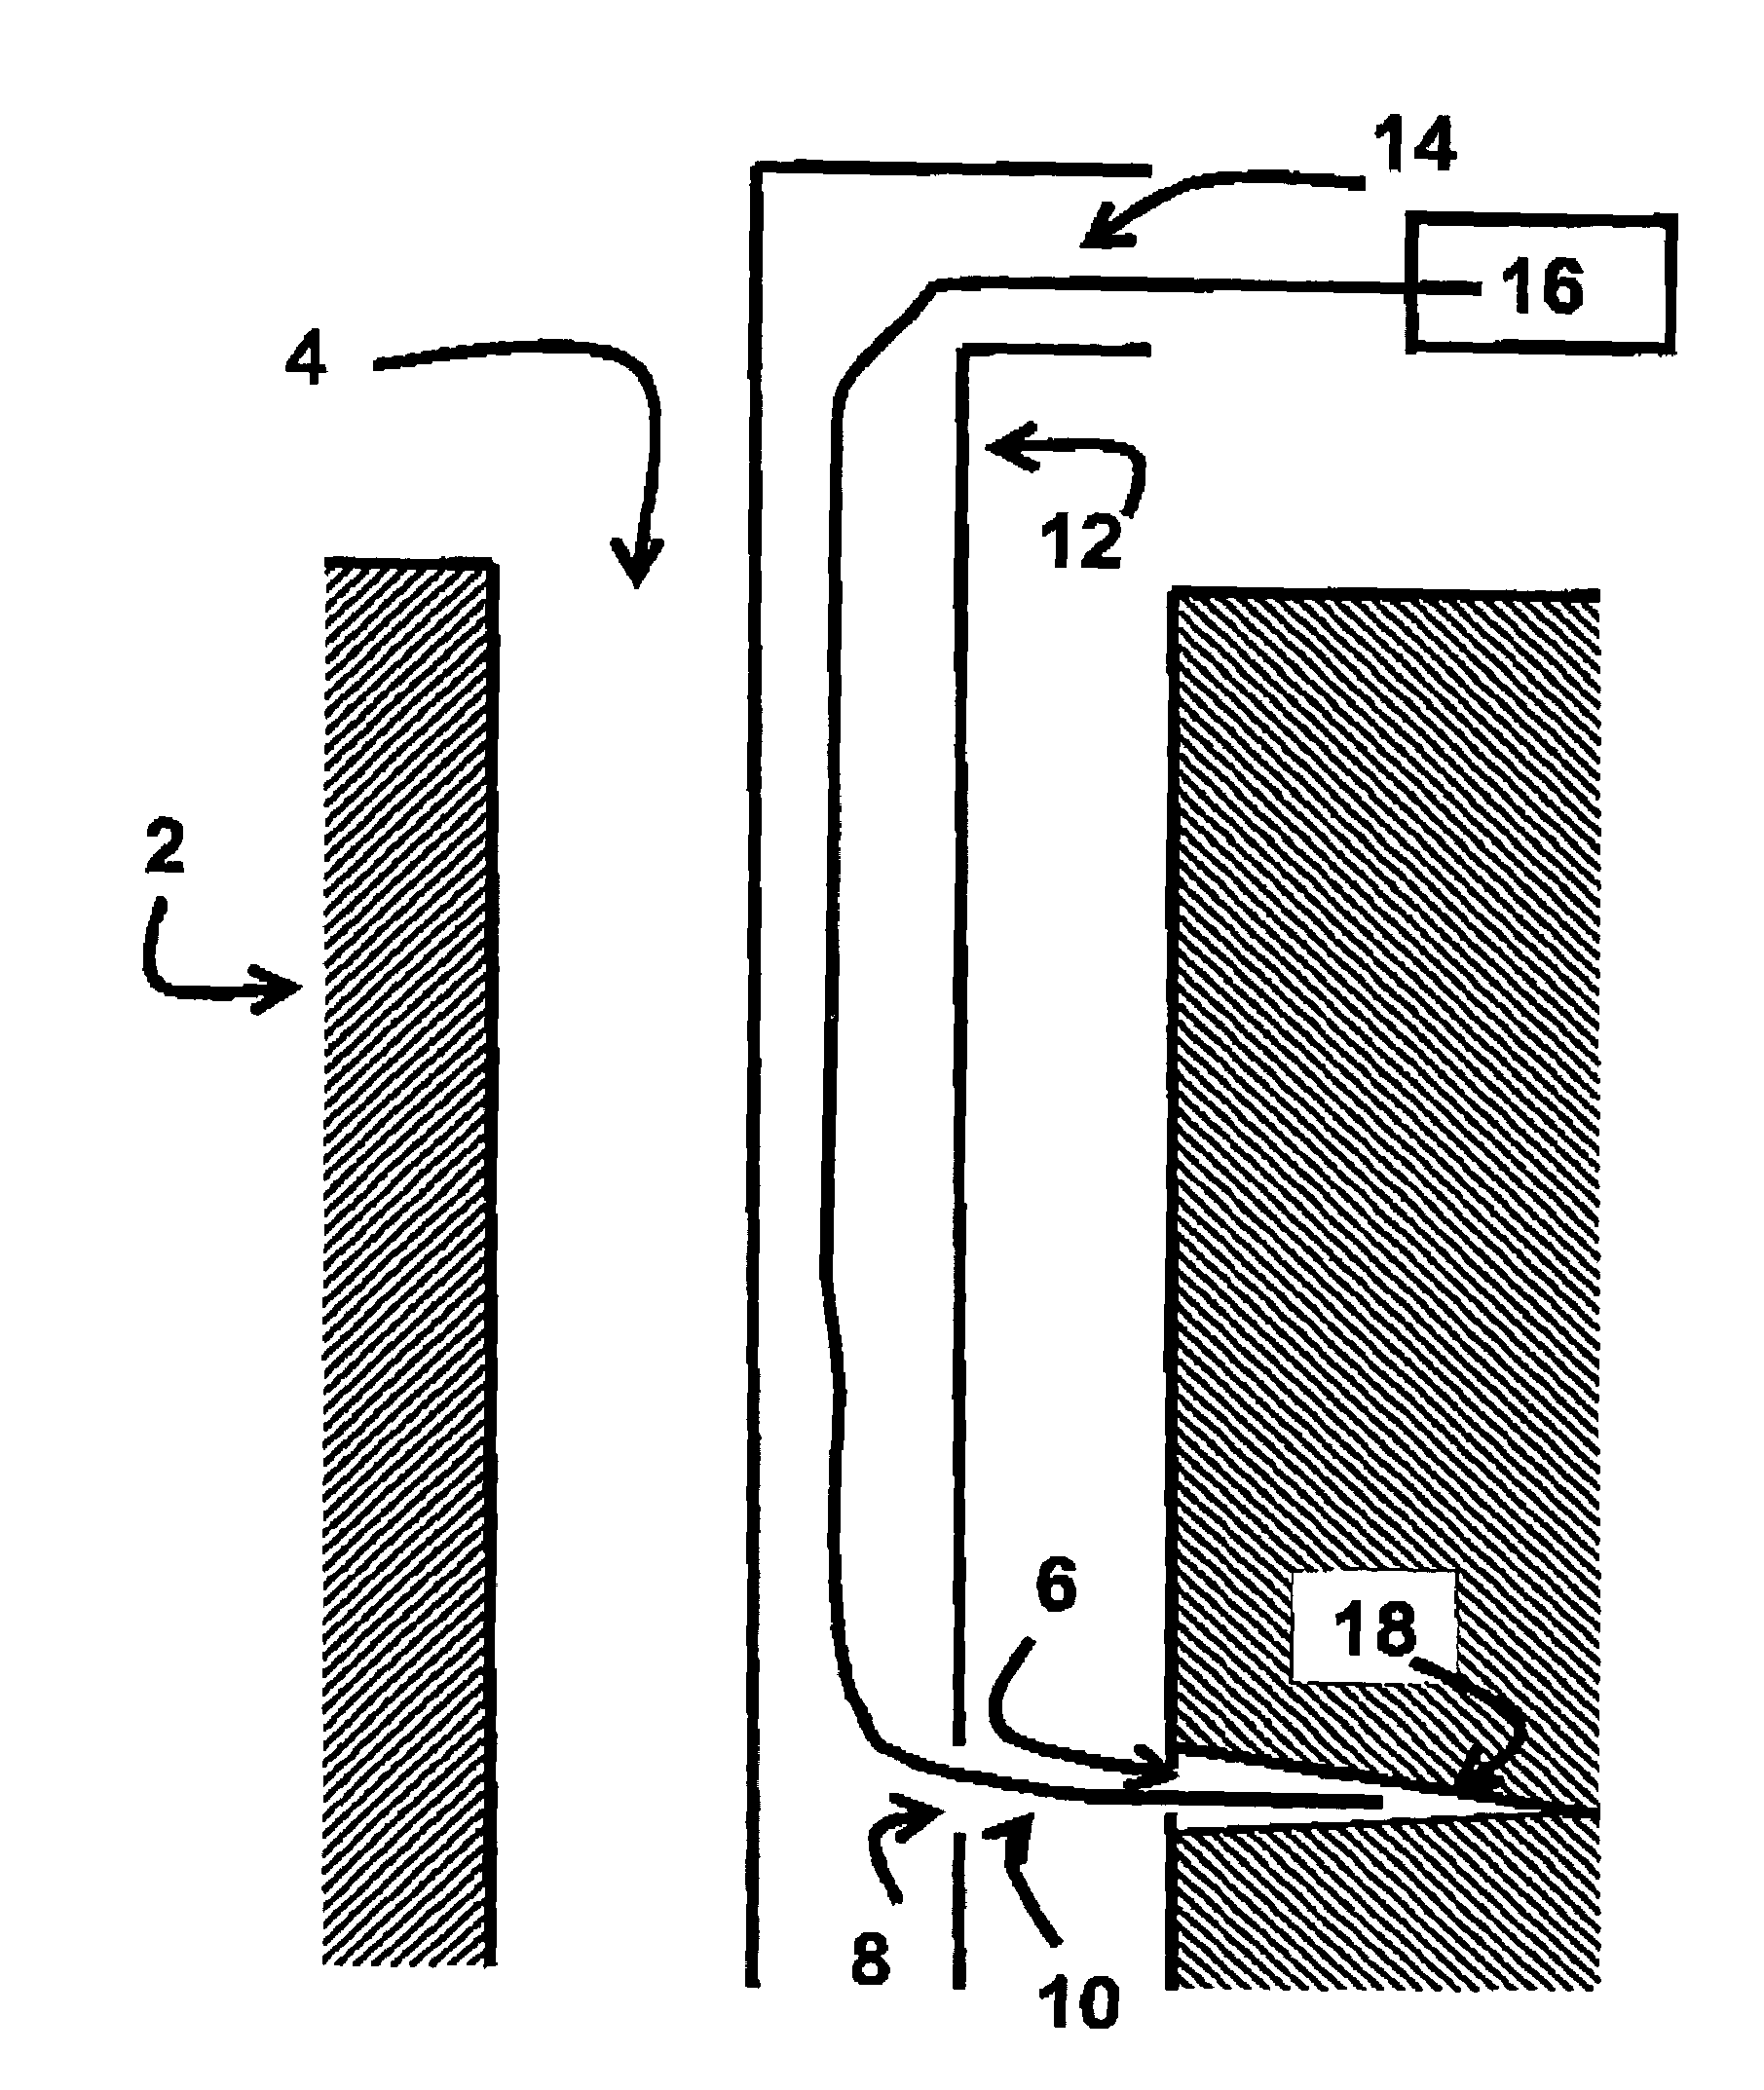 Means and method for assessing the geometry of a subterranean fracture during or after a hydraulic fracturing treatment